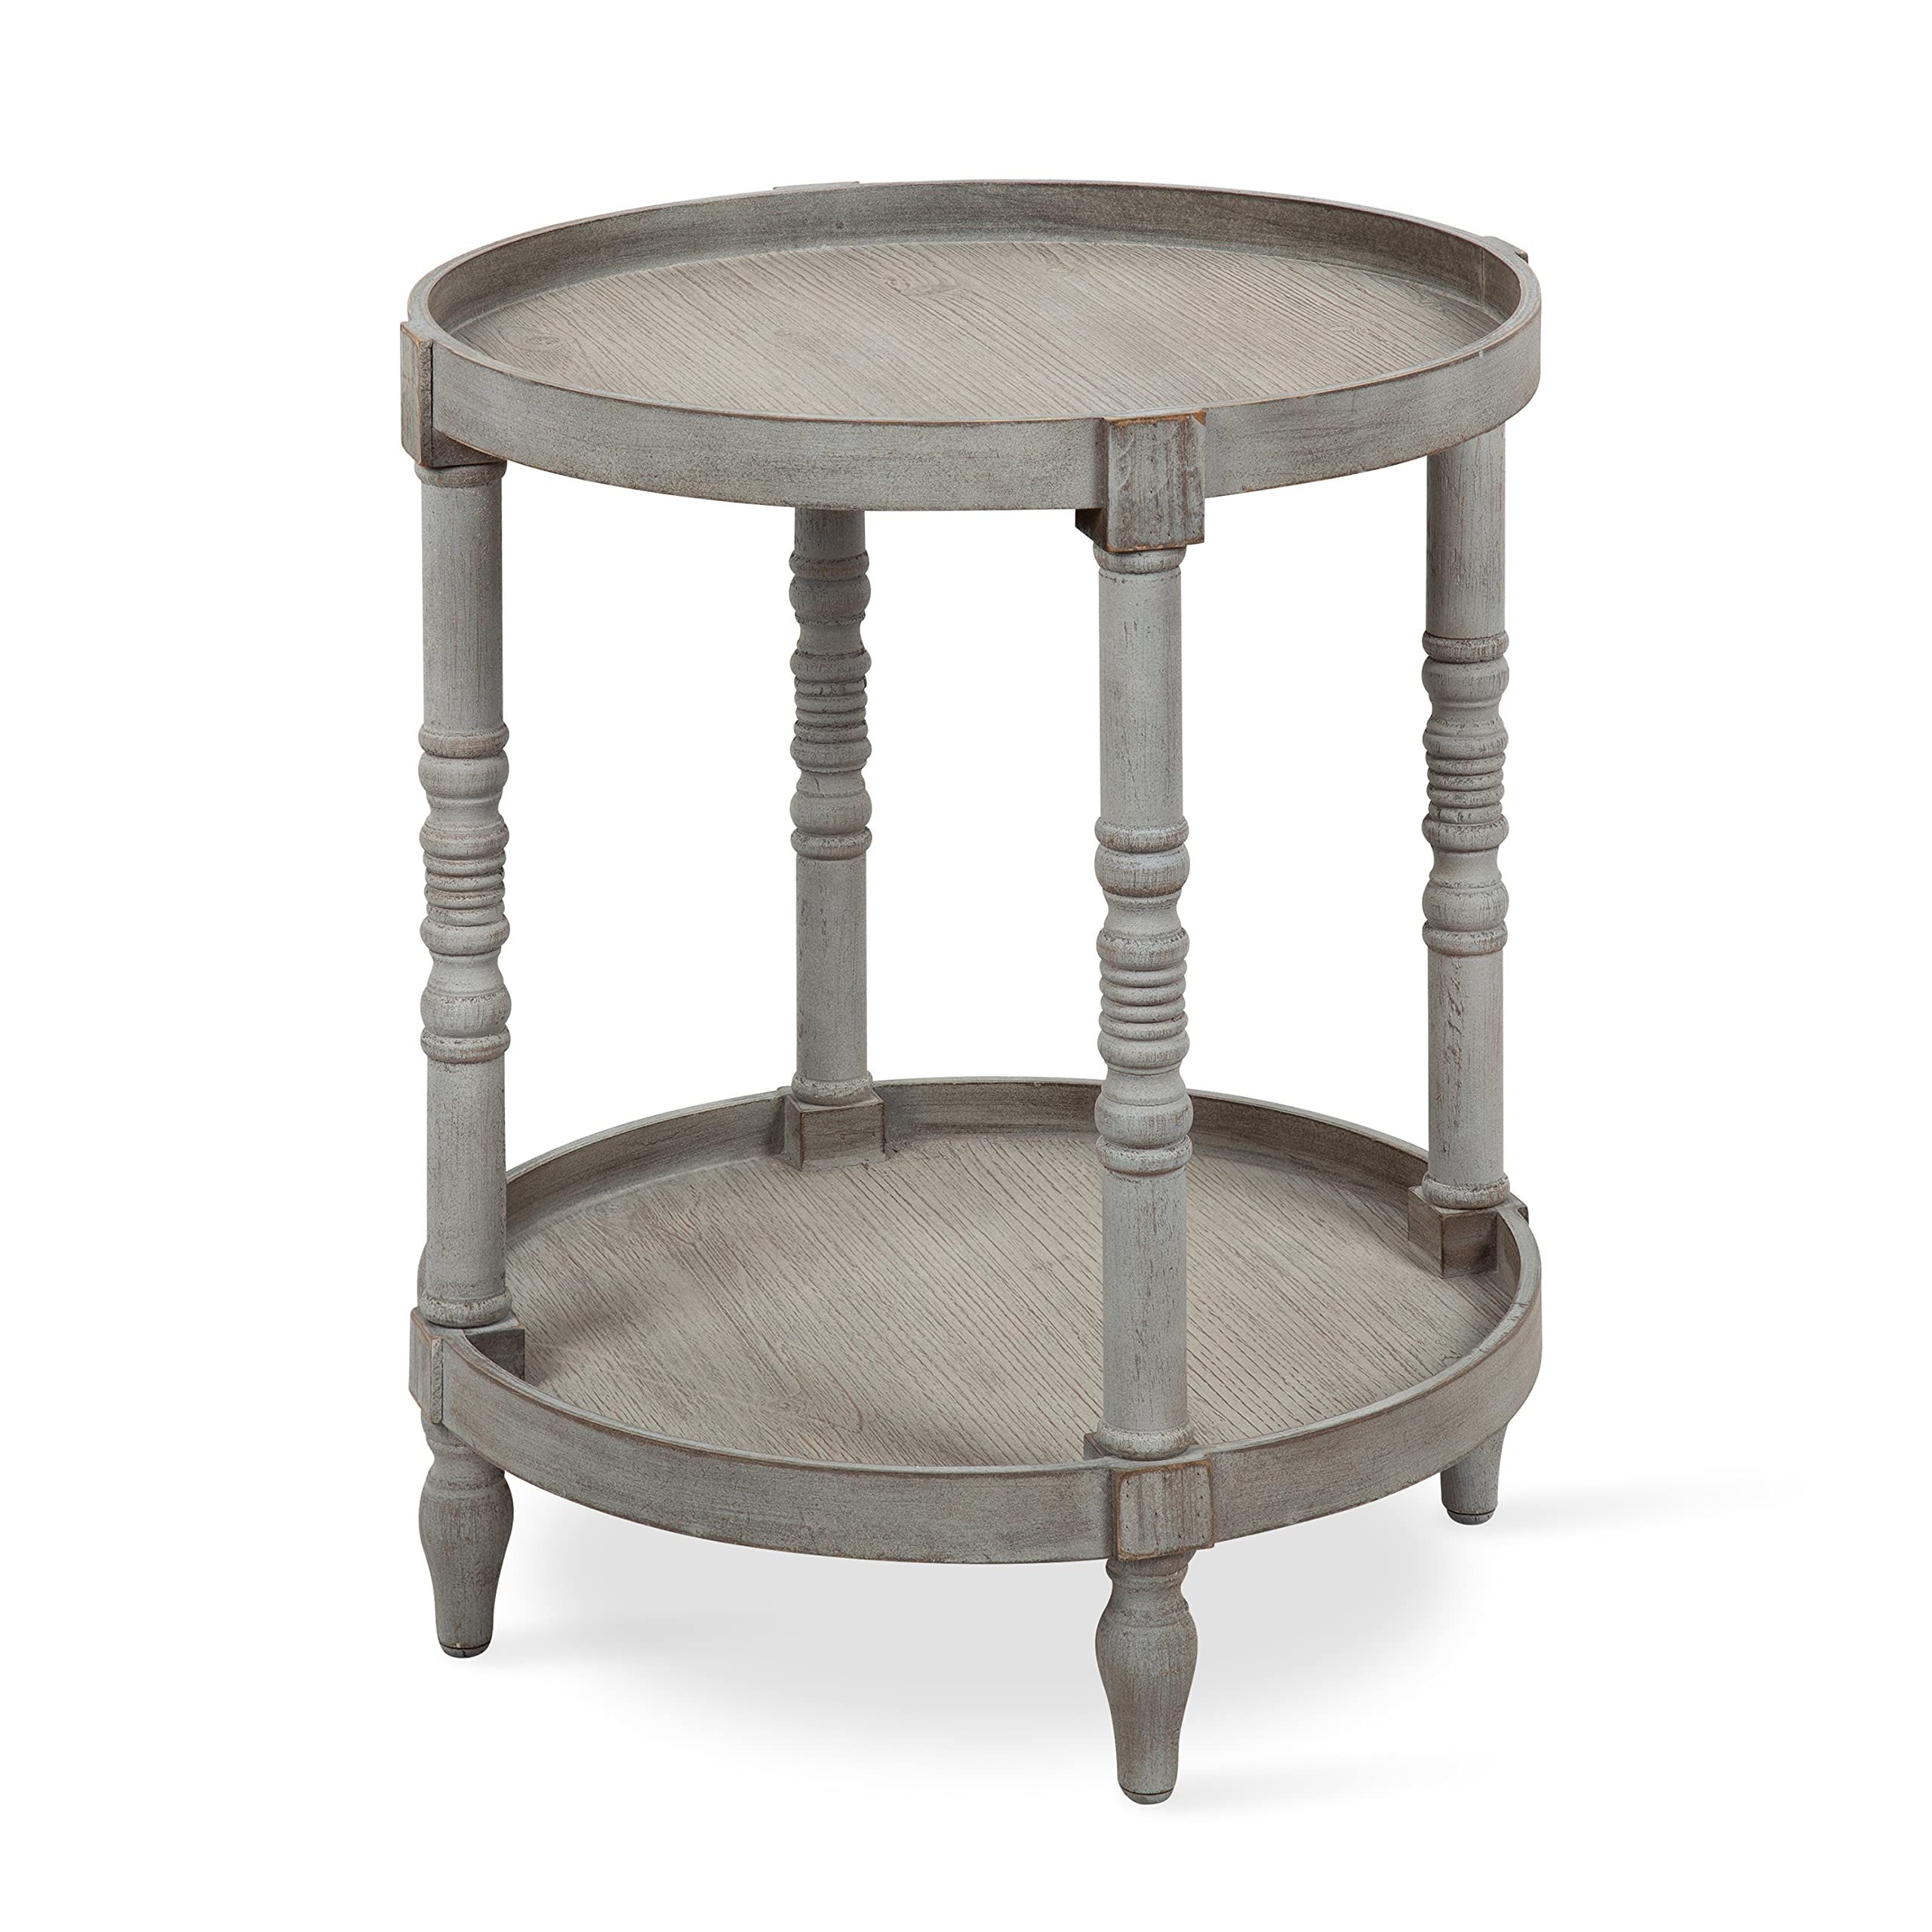 Newest Amazon: Kate And Laurel Bellport Shabby Chic Round Side Accent Table Or  Plant Stand With Turned Legs And Lower Shelf, Distressed Gray Finish : Home  & Kitchen With Kate And Laurel Bellport Farmhouse Drink Tables (Photo 1 of 10)